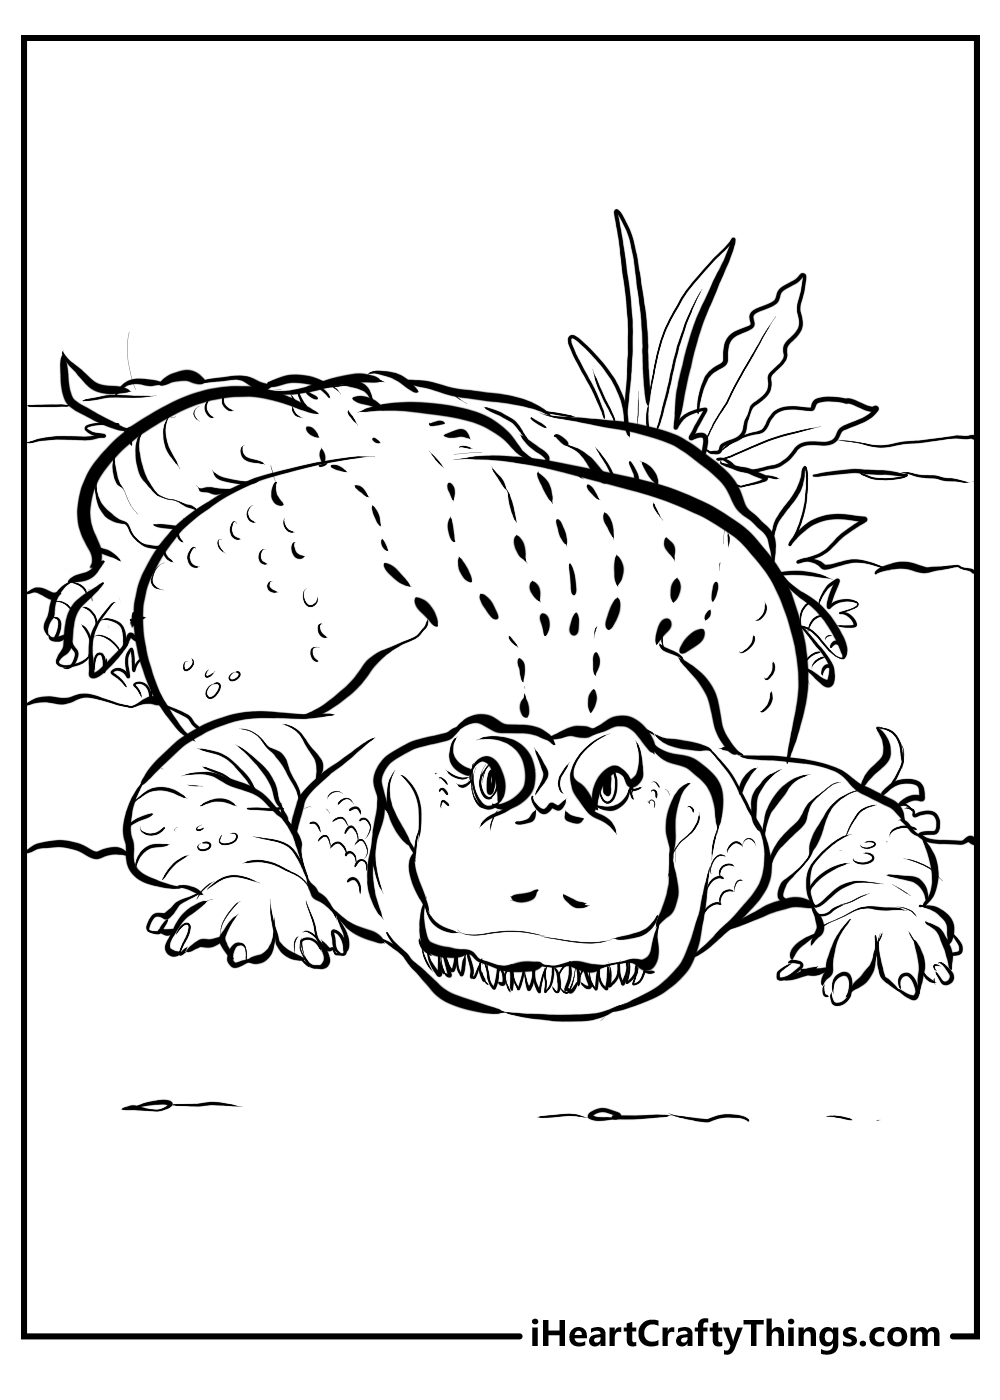 Printable alligators coloring pages updated